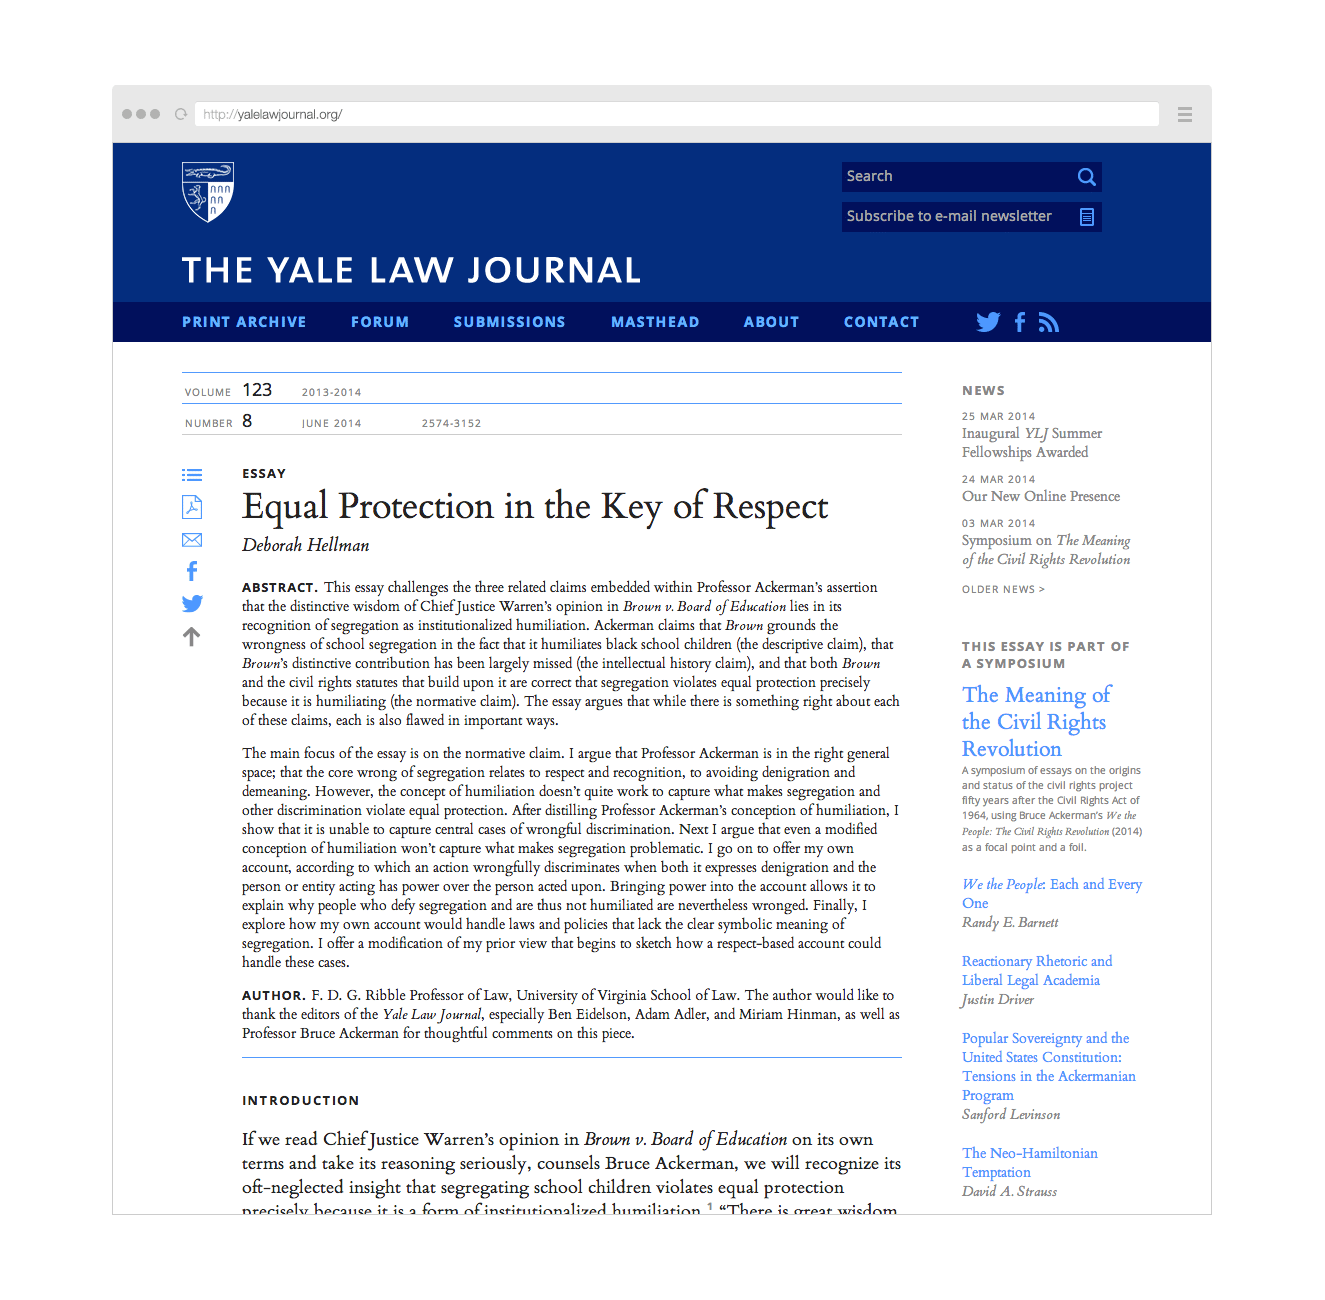 Point Five The Yale Law Journal website